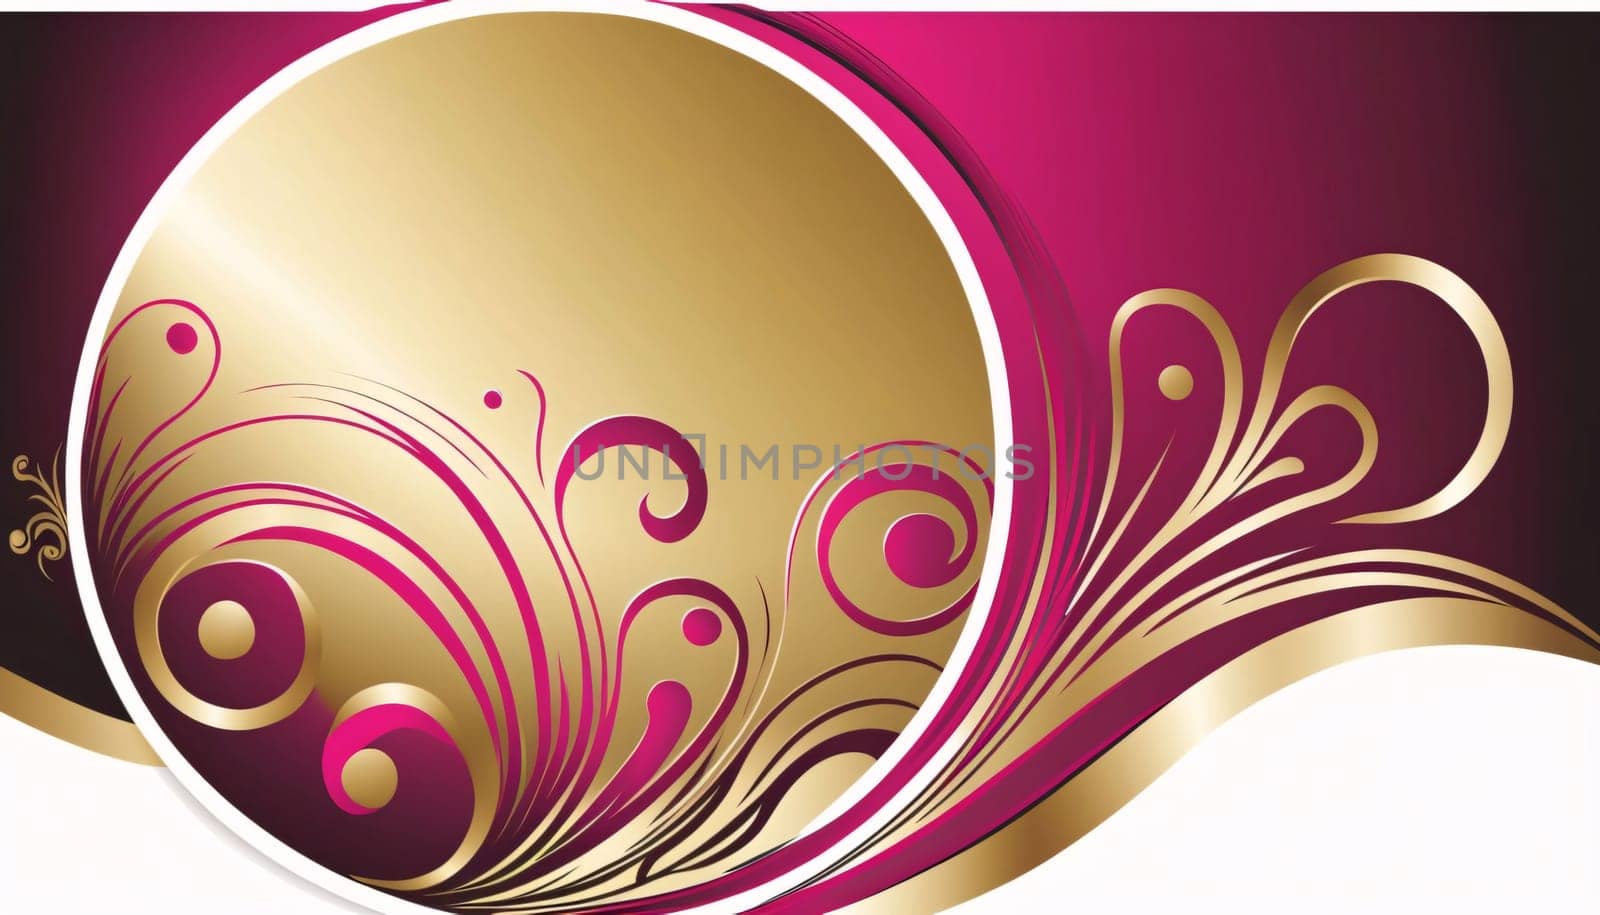 abstract floral background, vector illustration, contains transparencies, gradients and effects by ThemesS